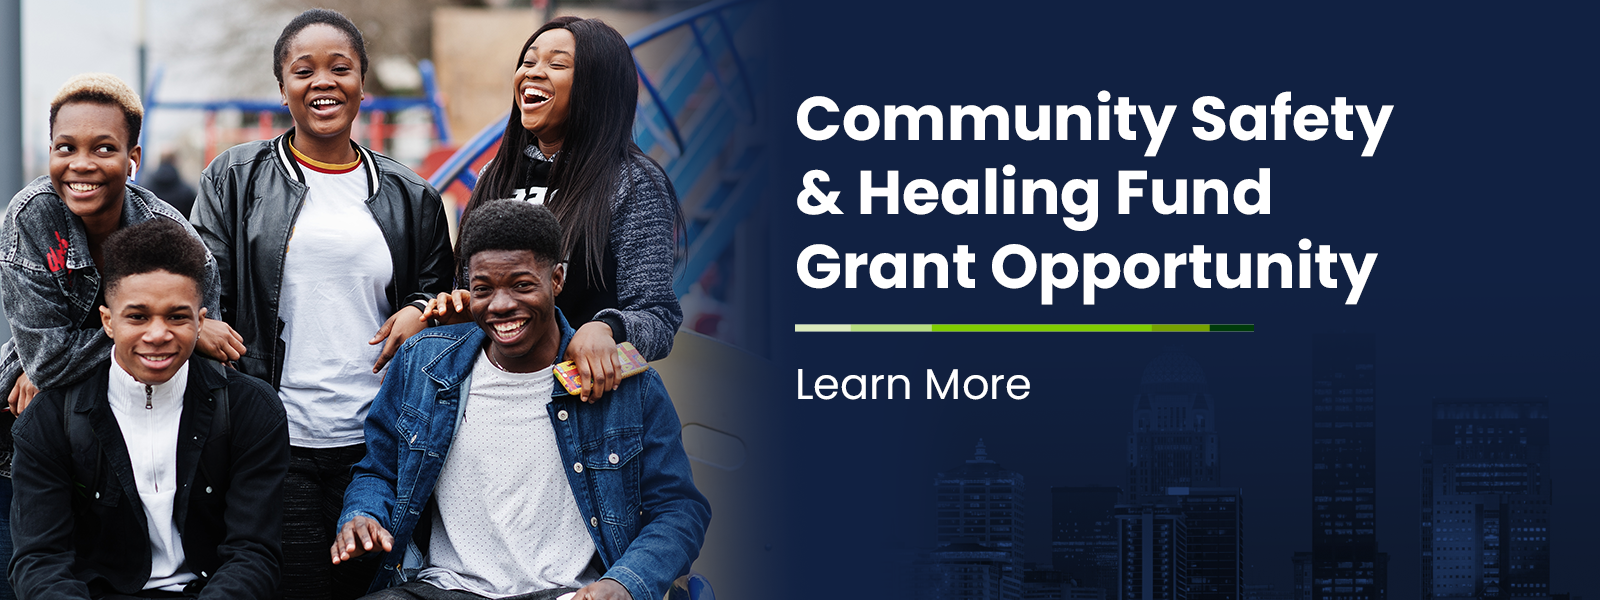 Community Safety & Healing Fund Grant Opportunity. Click on this slider to learn more